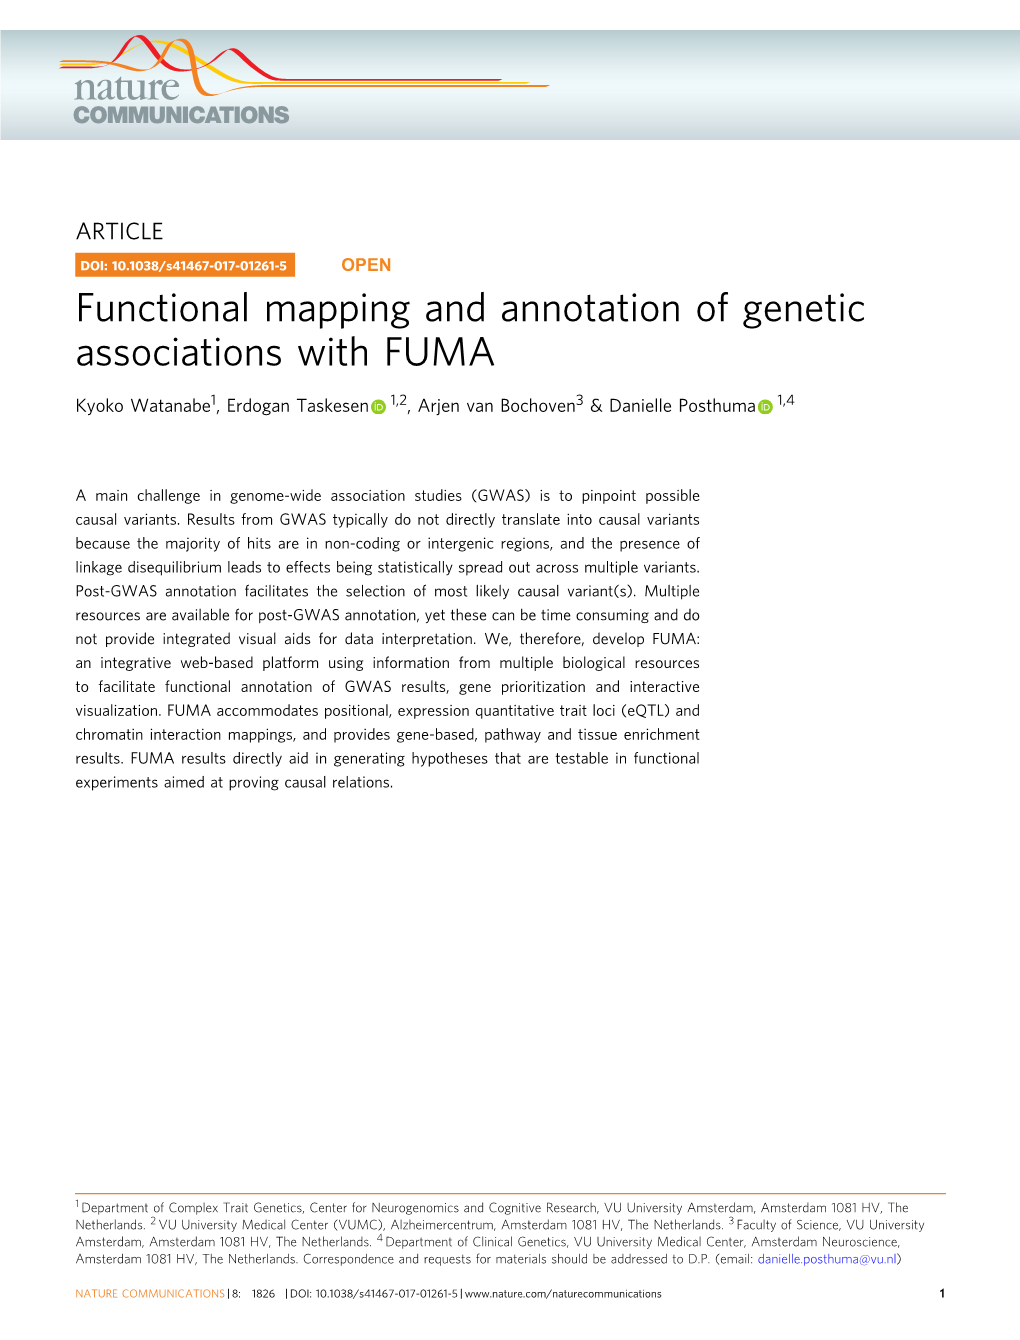 Functional Mapping and Annotation of Genetic Associations with FUMA